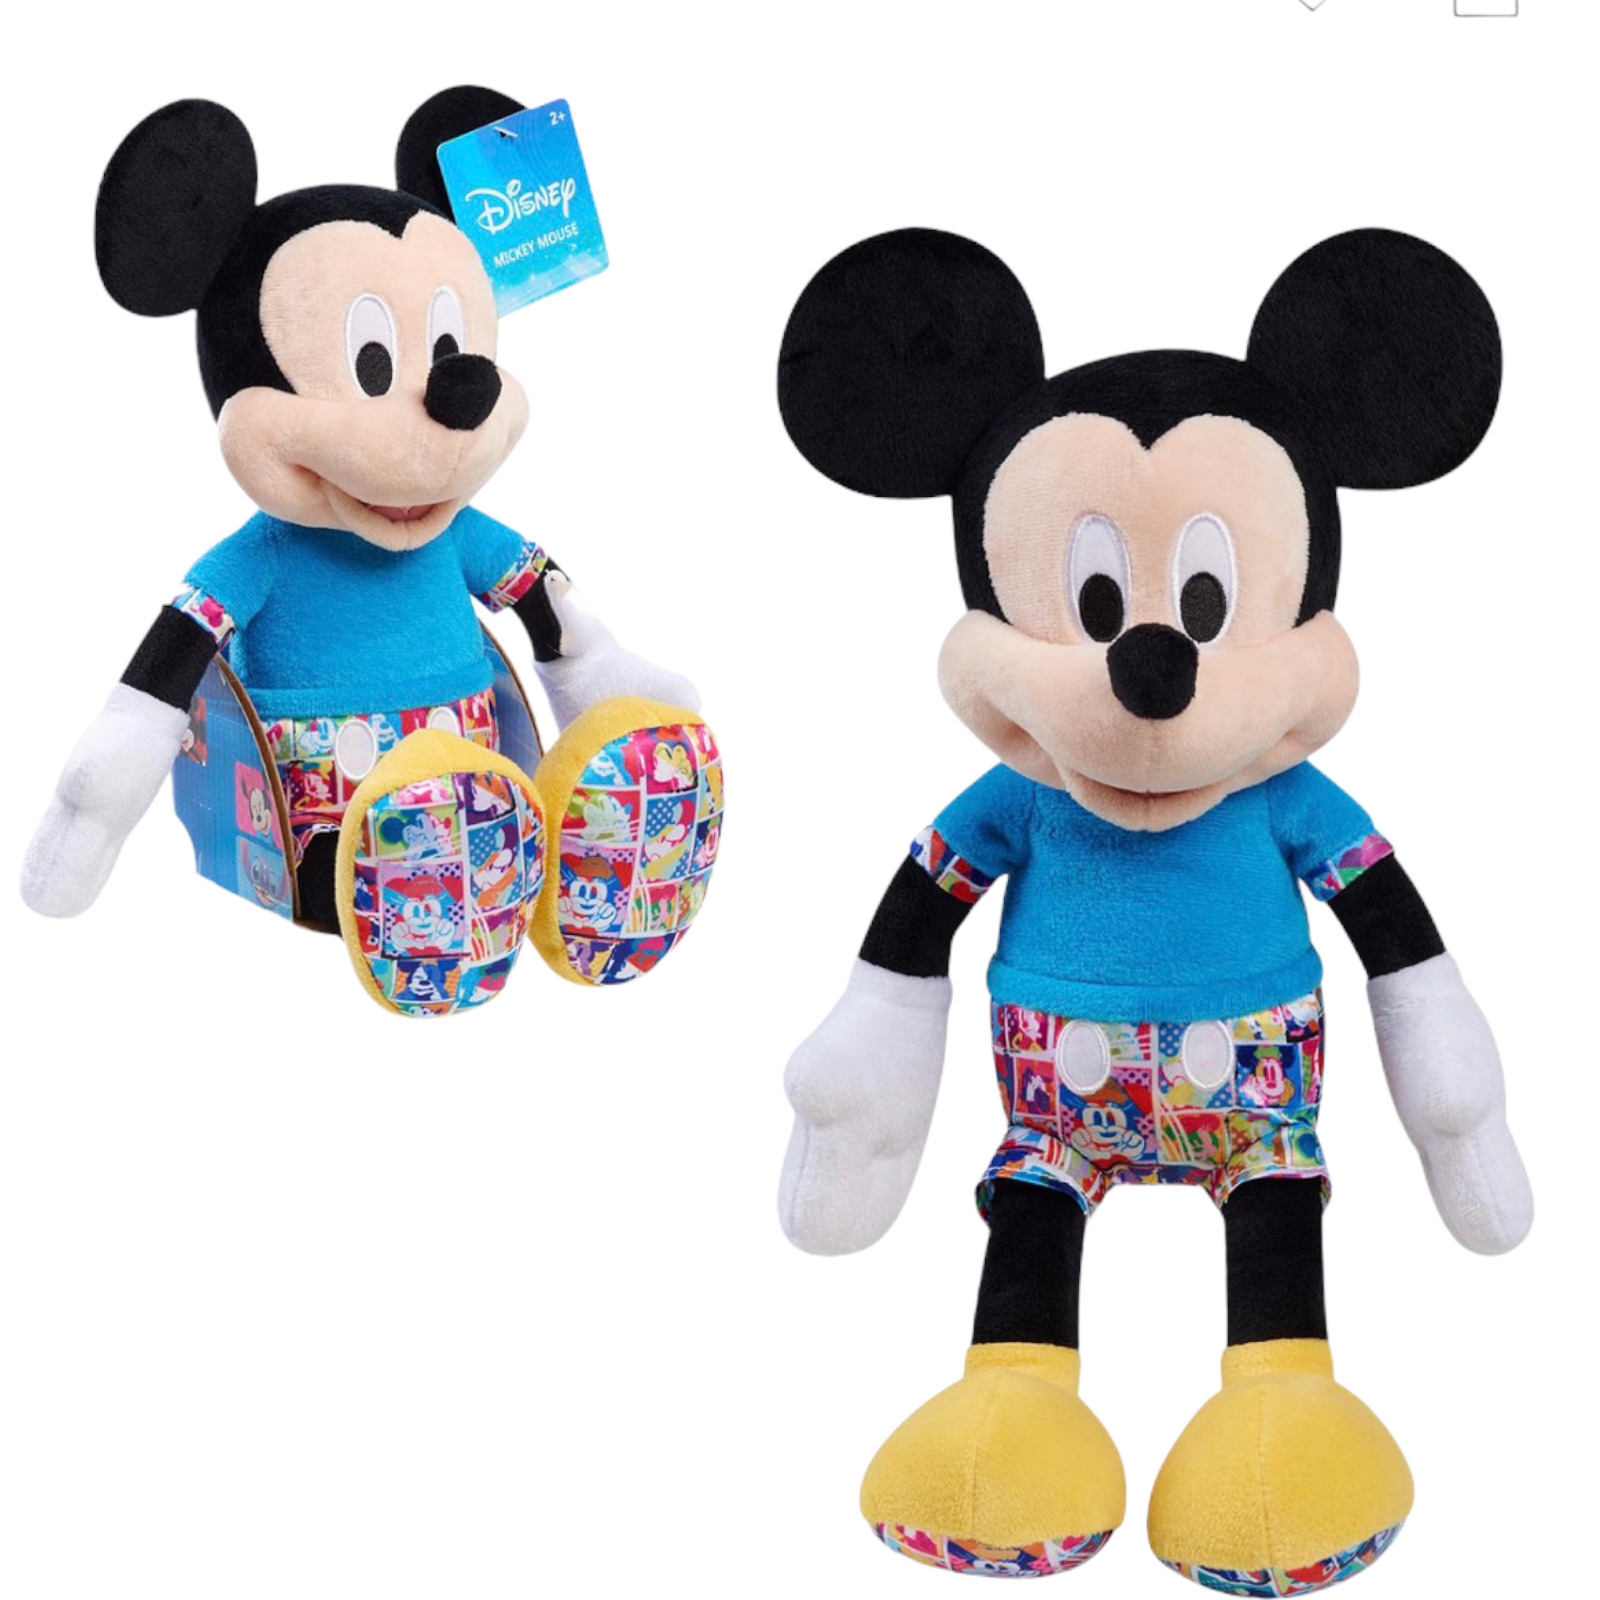 Disney Classics Mickey Mouse High-Quality.